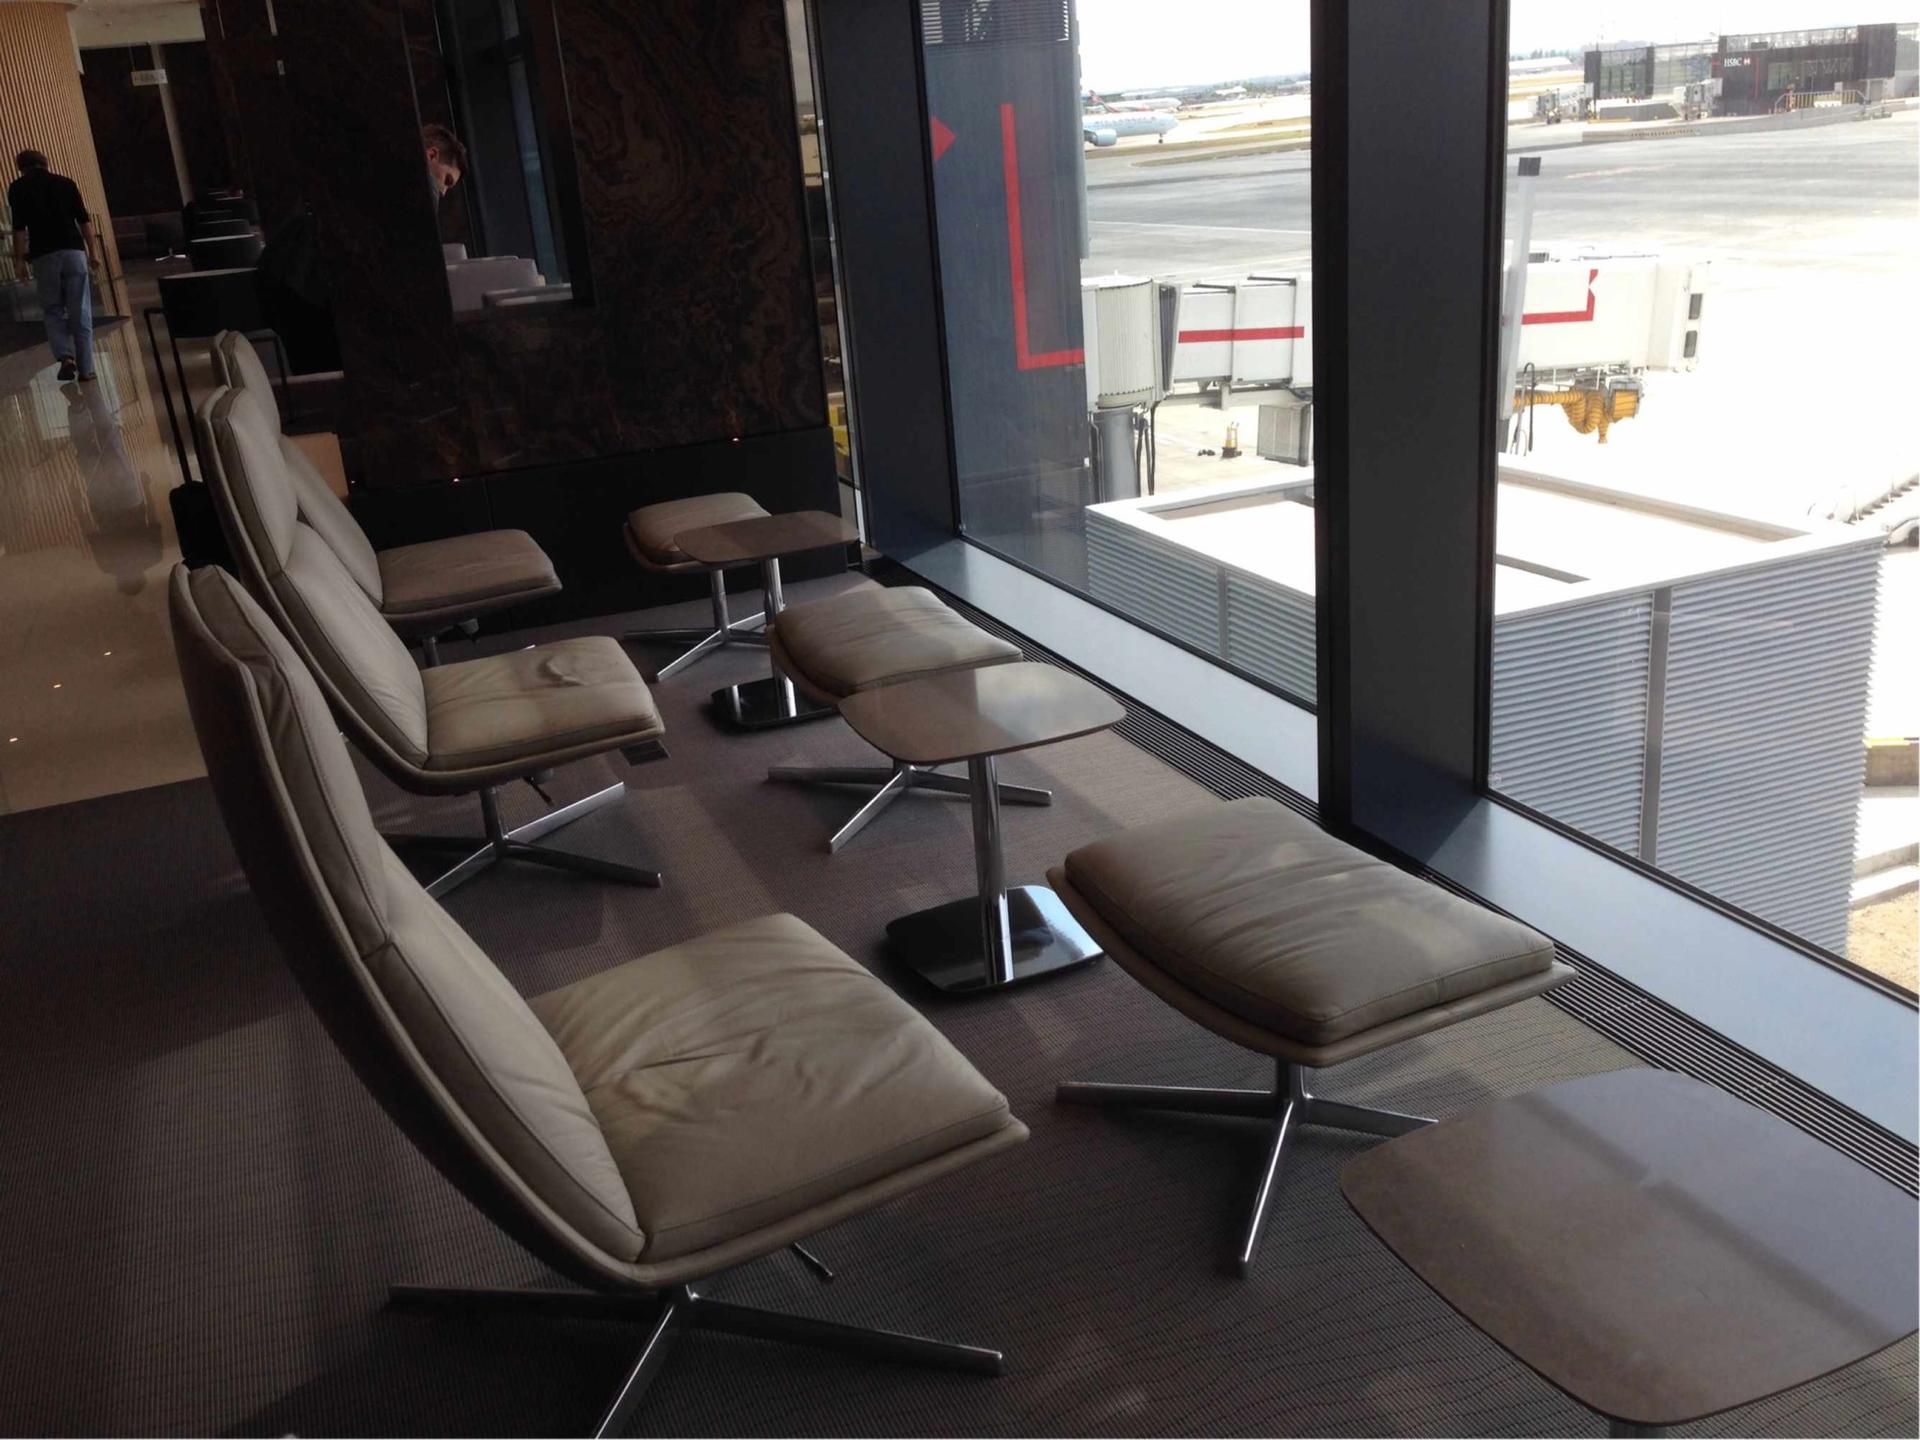 Air Canada Maple Leaf Lounge image 8 of 27